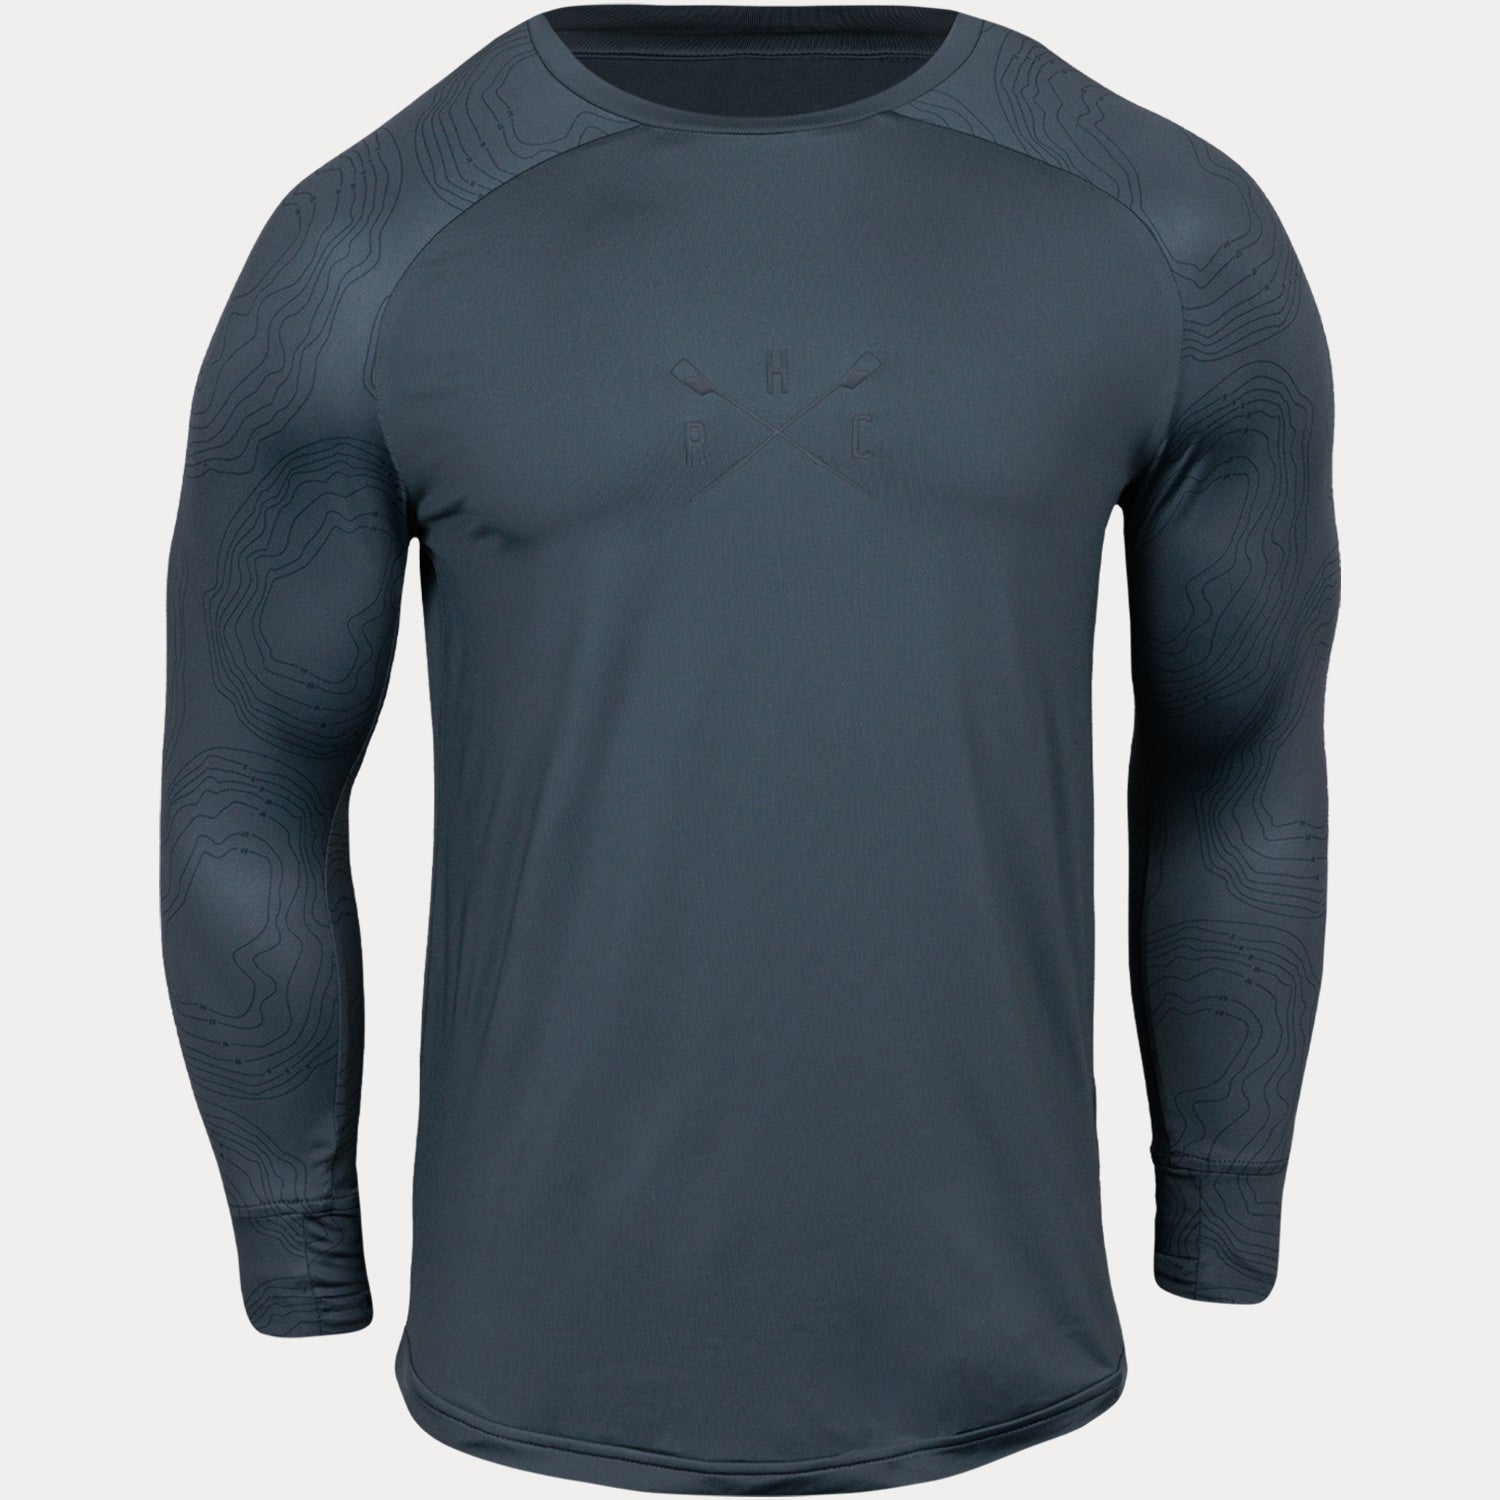 Long sleeve compression shirt with hydrow crossed oars logo on center chest